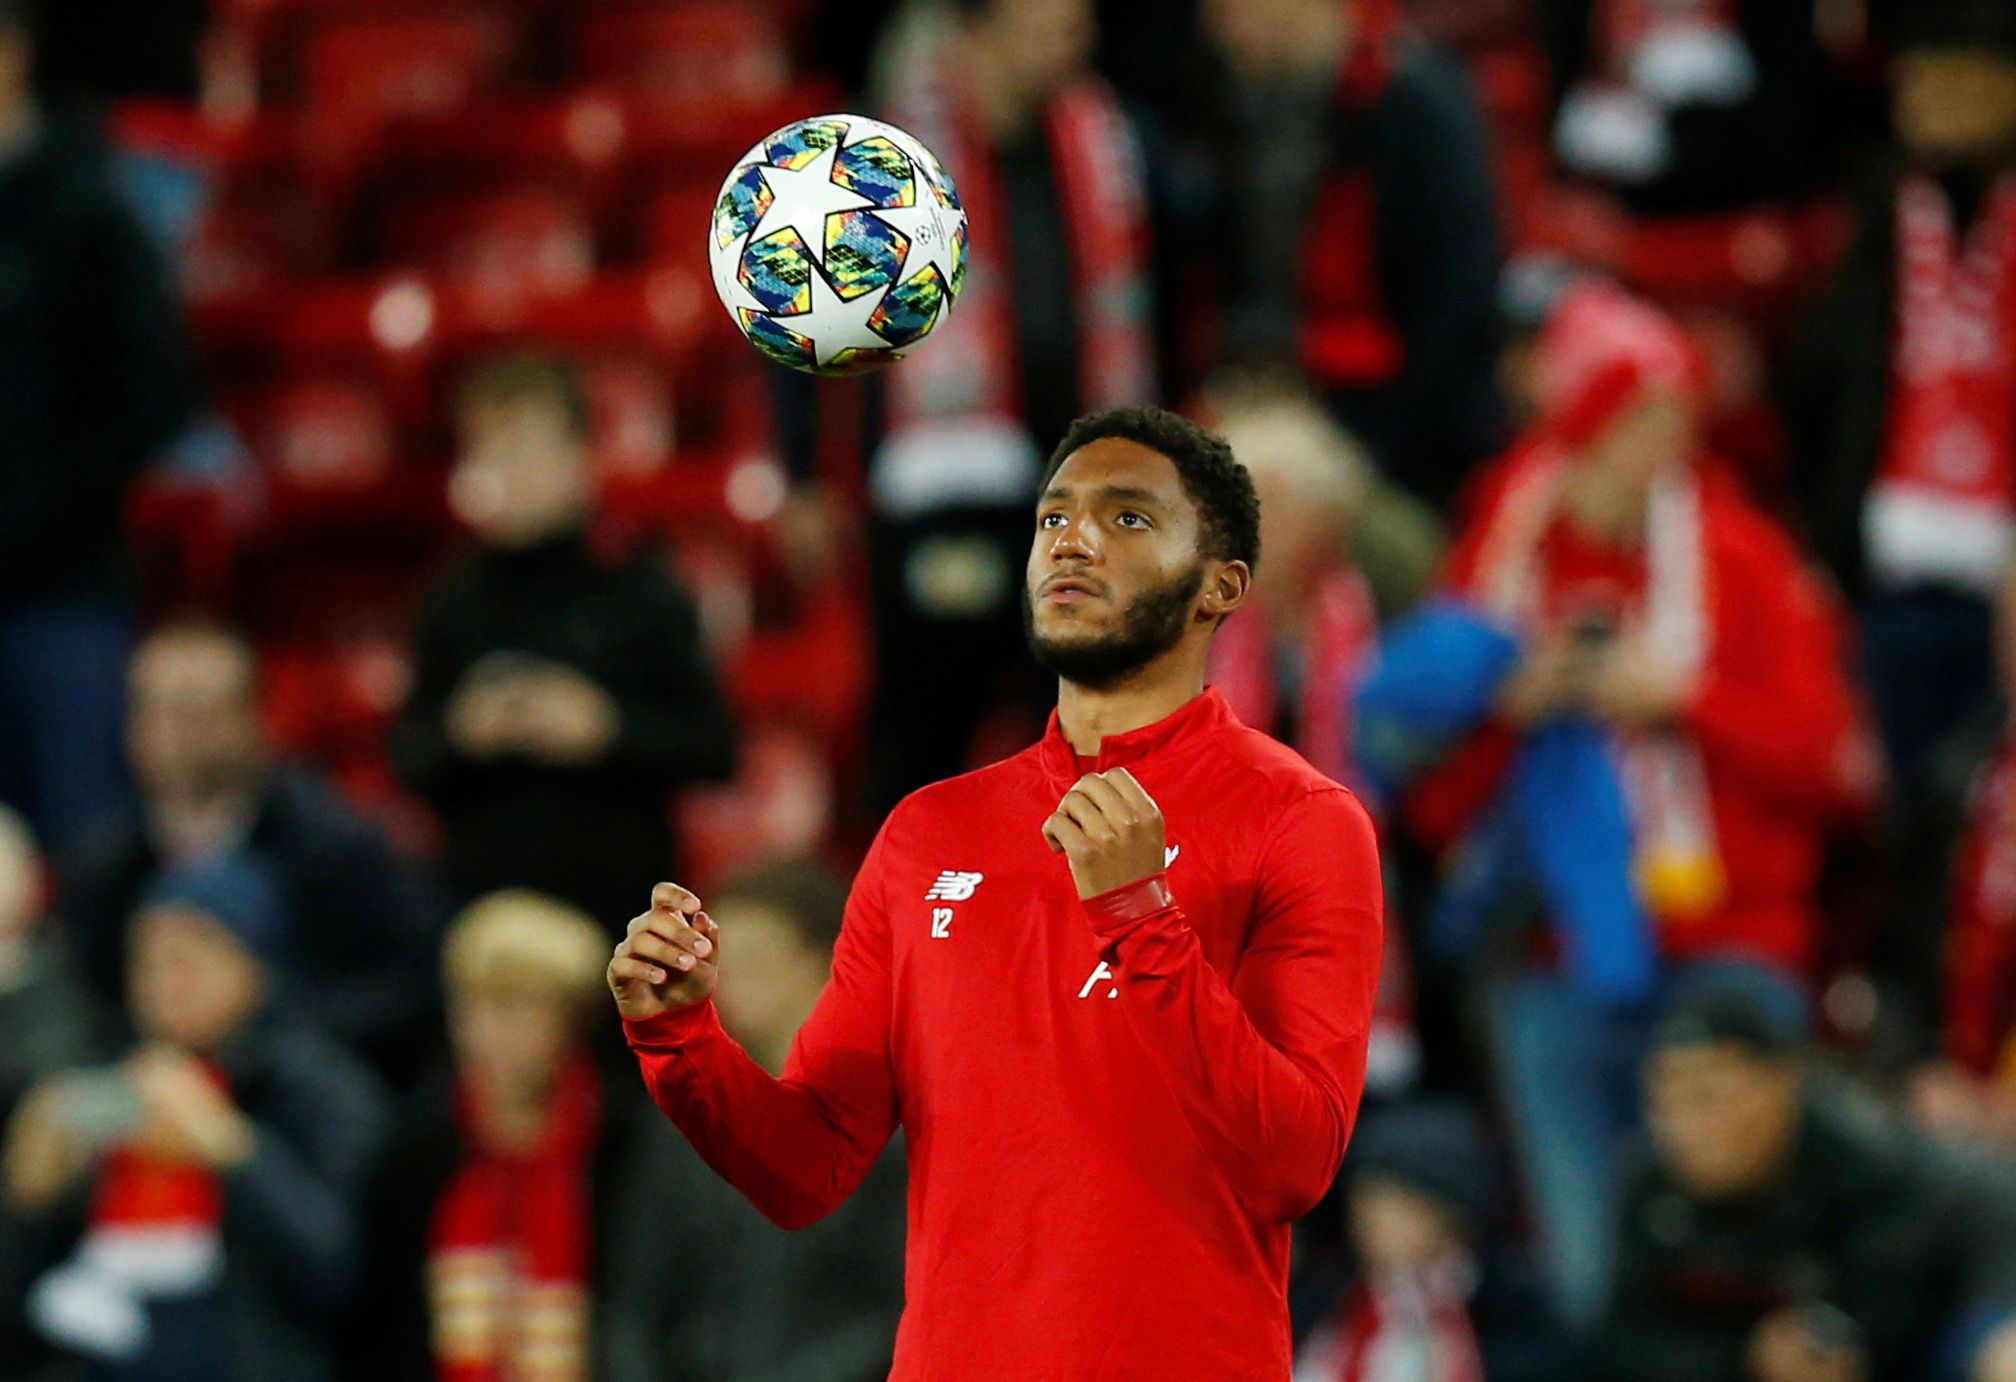 Soccer Football - Champions League - Group E - Liverpool v FC Salzburg - Anfield, Liverpool, Britain - October 2, 2019  Liverpool's Joe Gomez during the warm up before the match    REUTERS/Andrew Yates